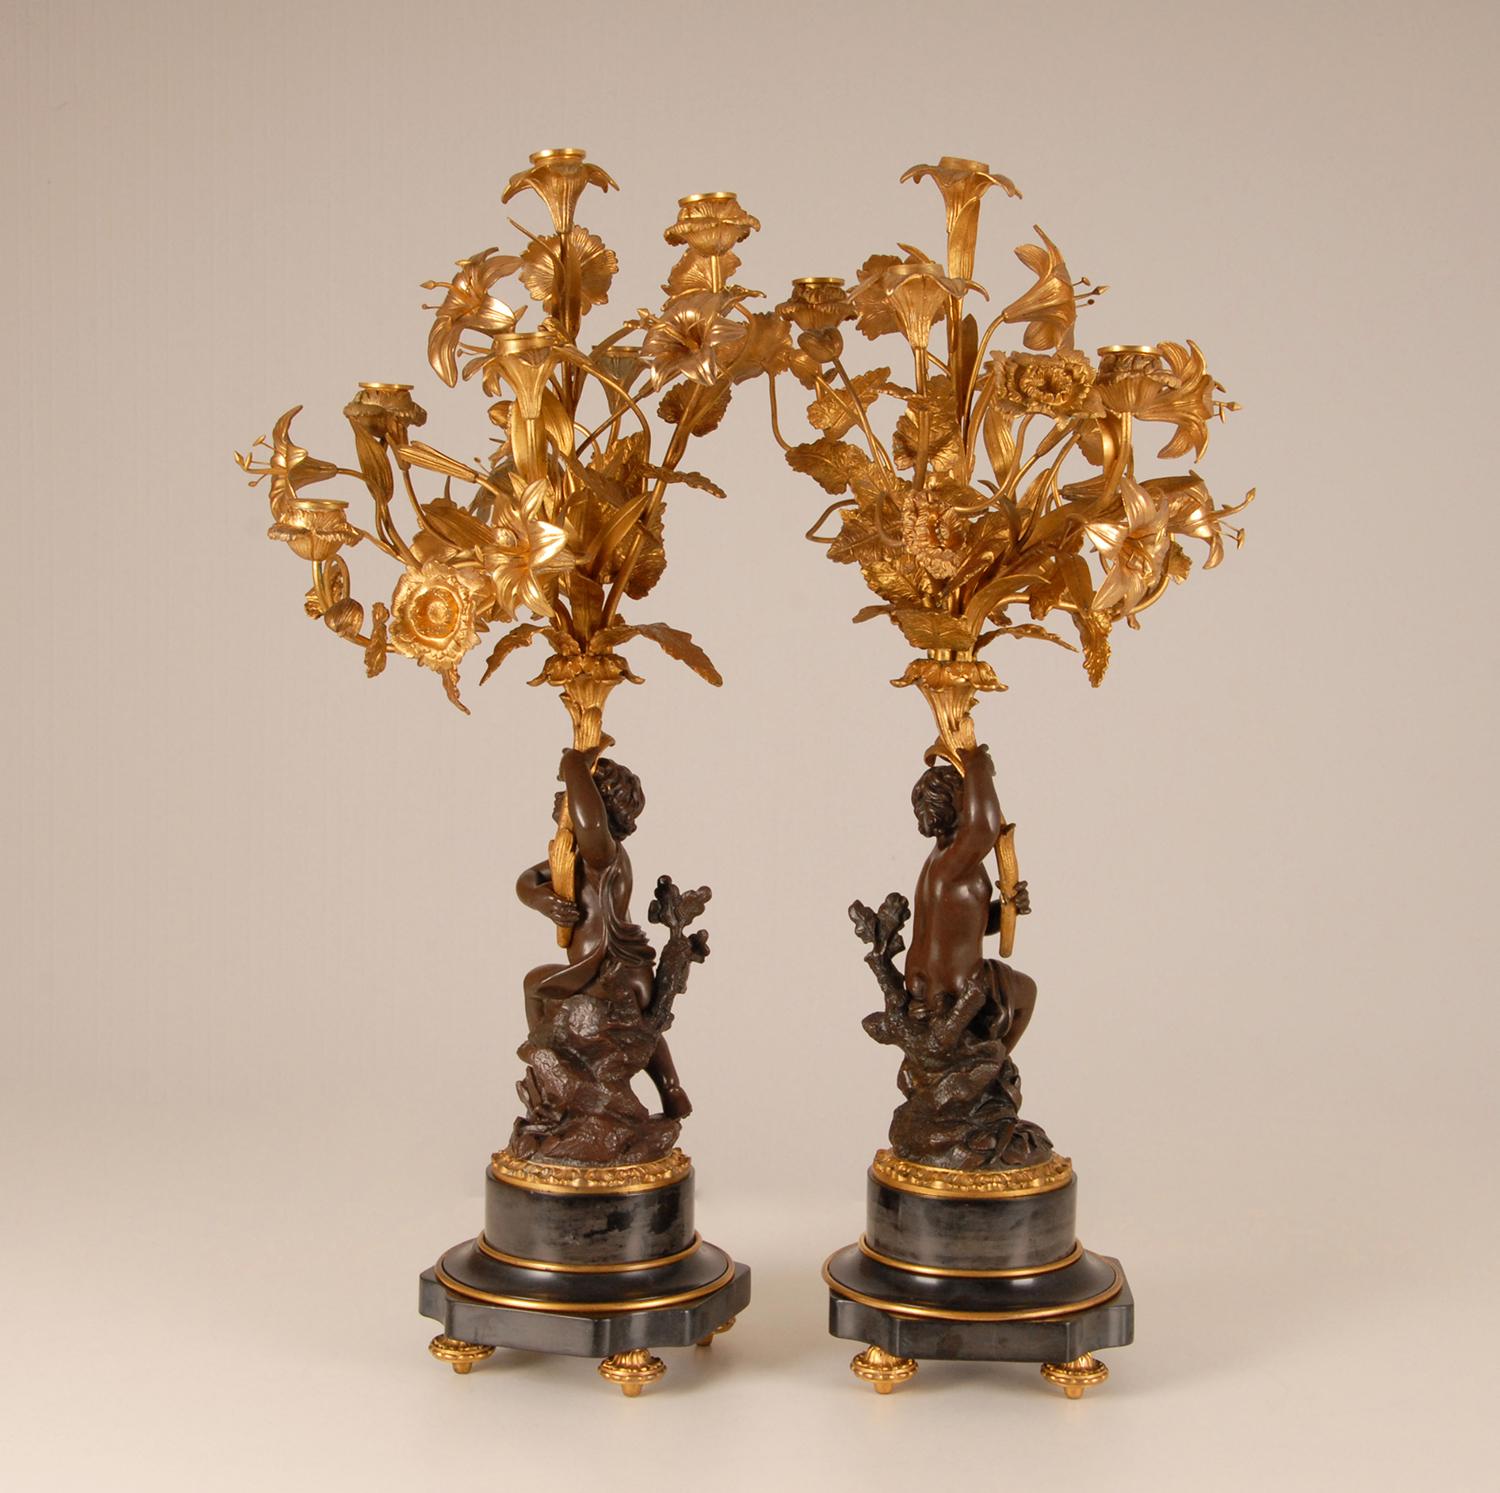 Cast Victorian French Gold Gilded Bronze Putto and Flowers Candelabras on Marble Base For Sale